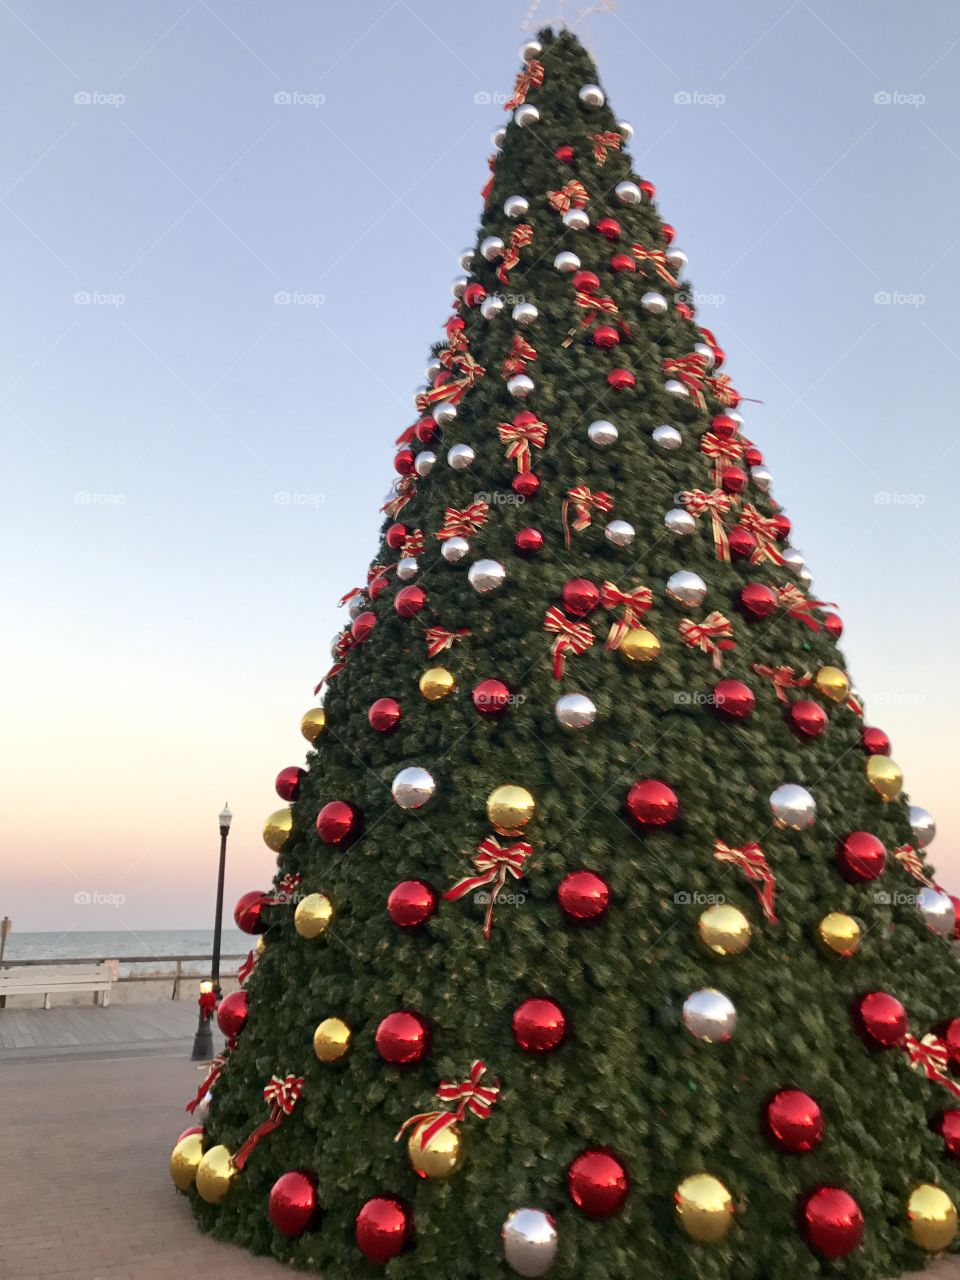 Christmas by the sea